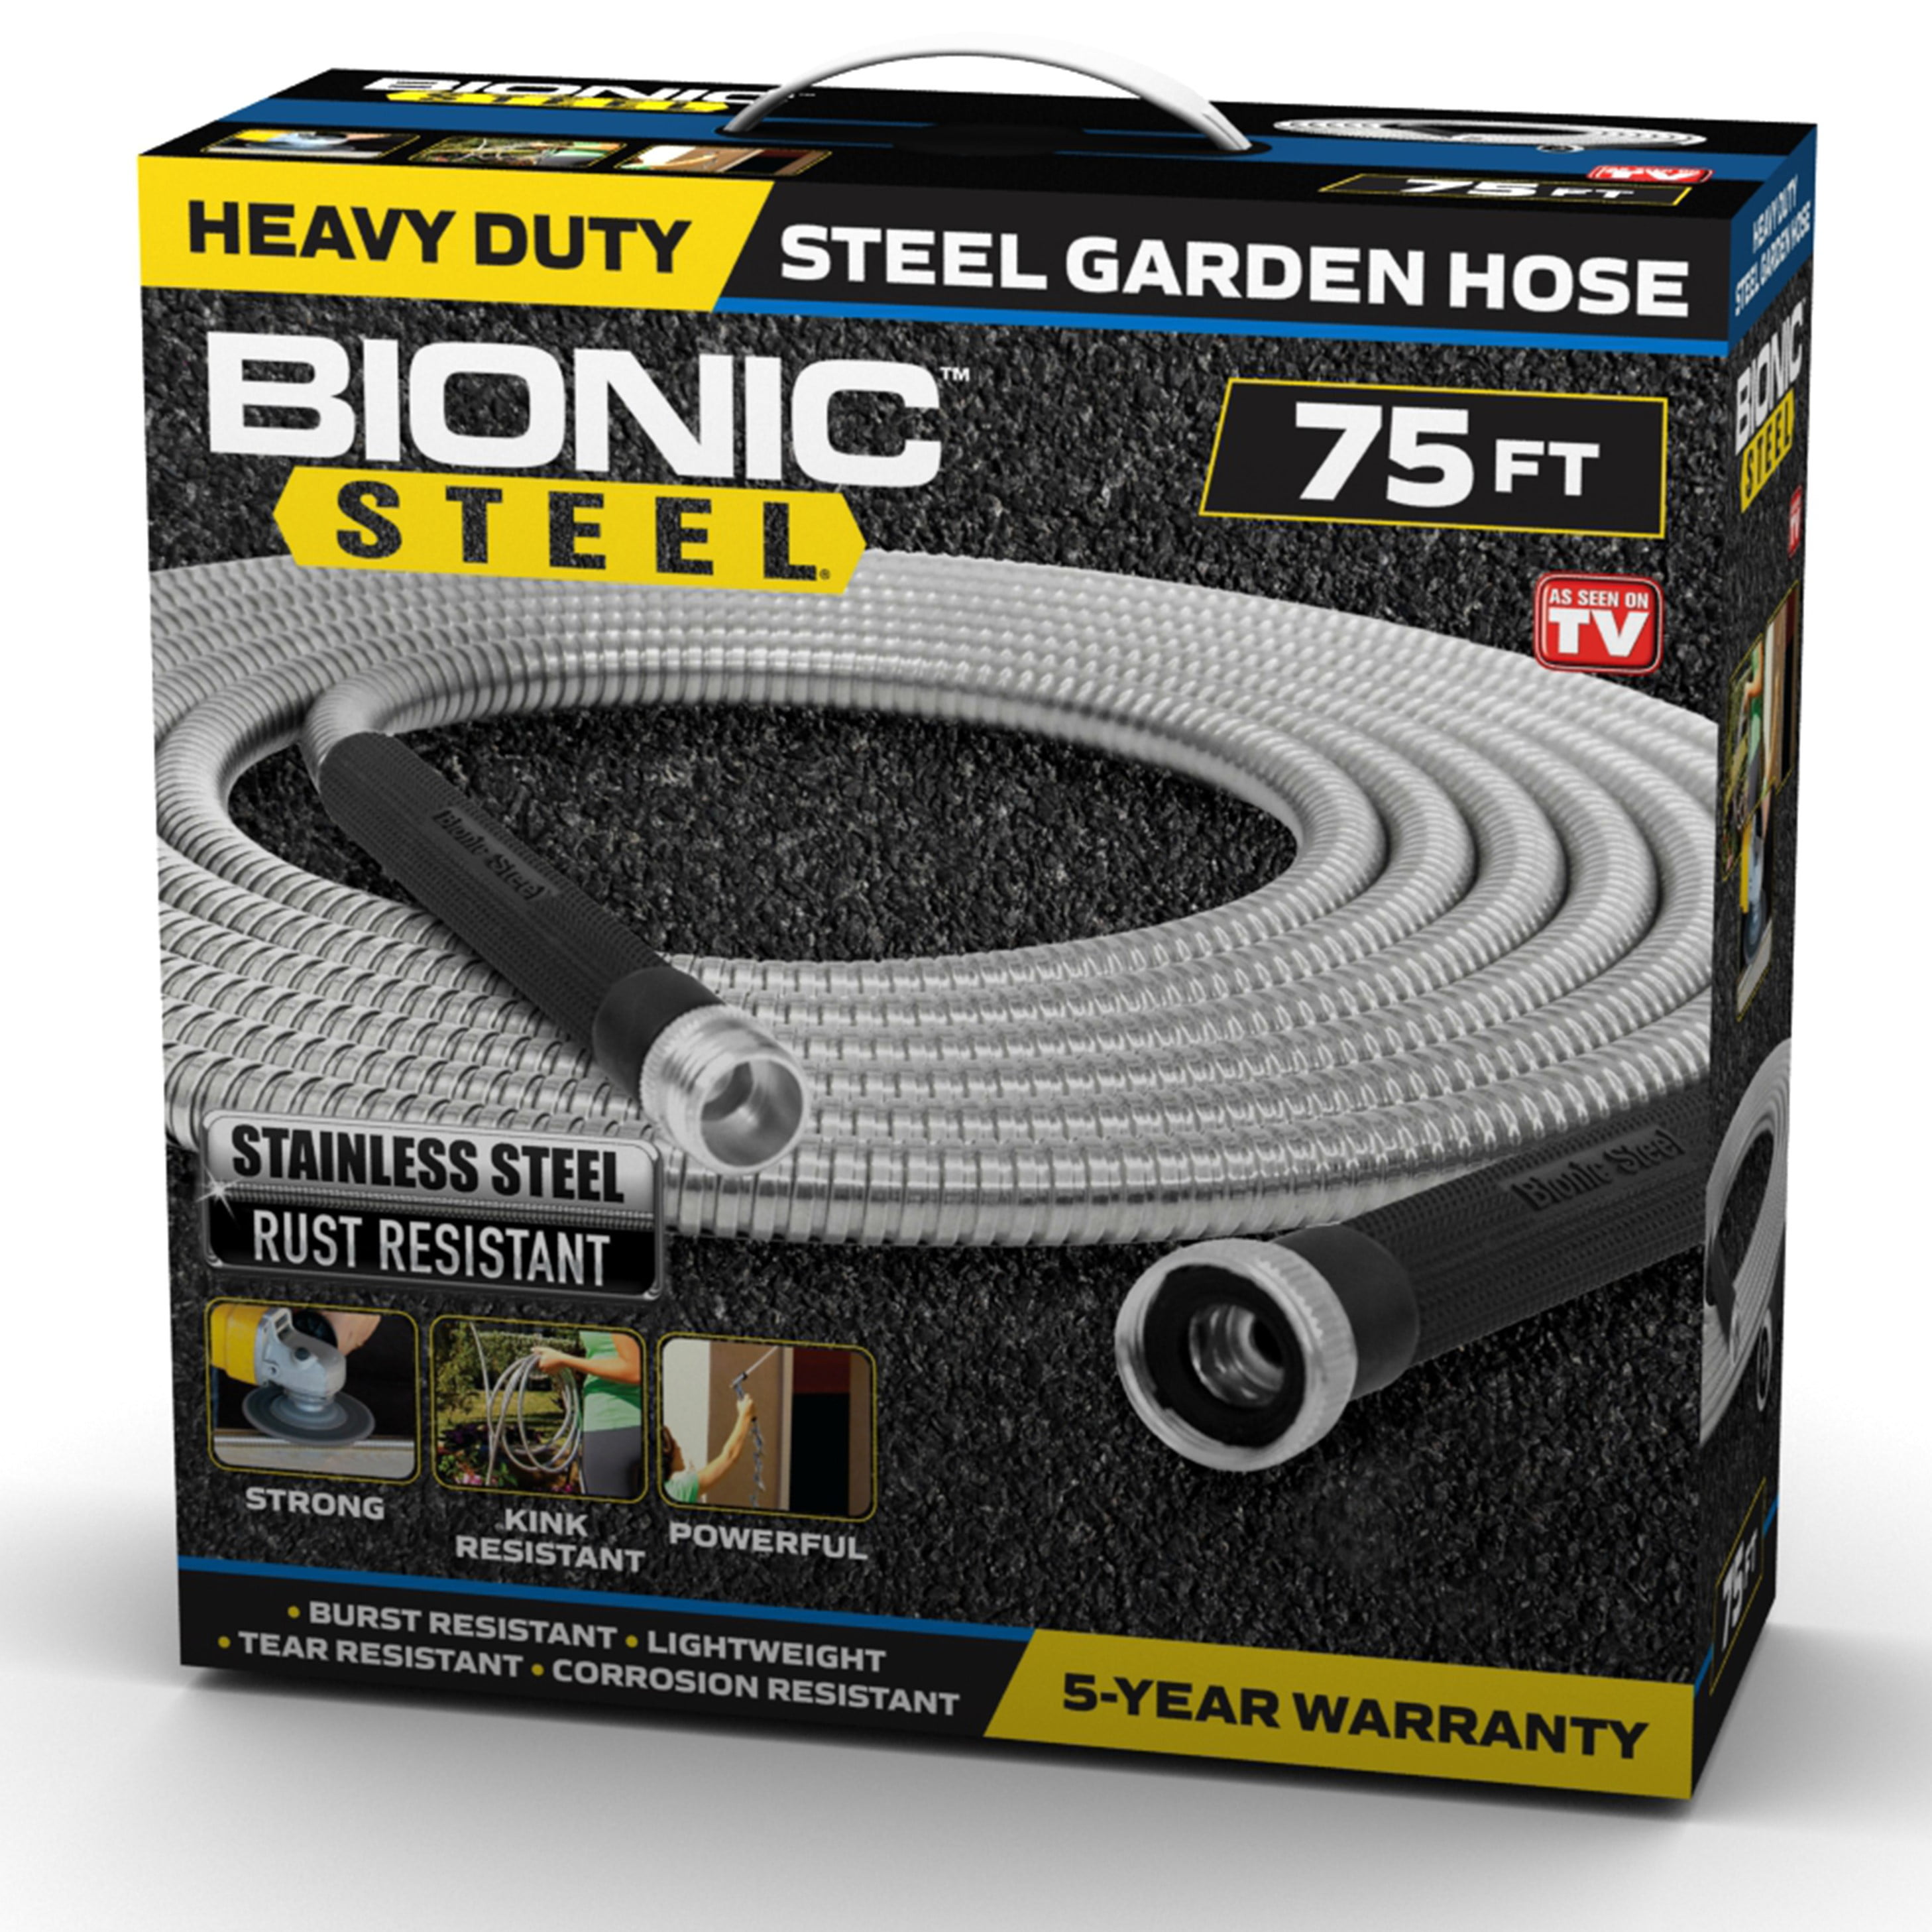 Metal Water Hose MTB 304 Stainless Steel Garden Hose 75-ft with Spray Nozzle and 3/4” Solid Aluminum Connectors